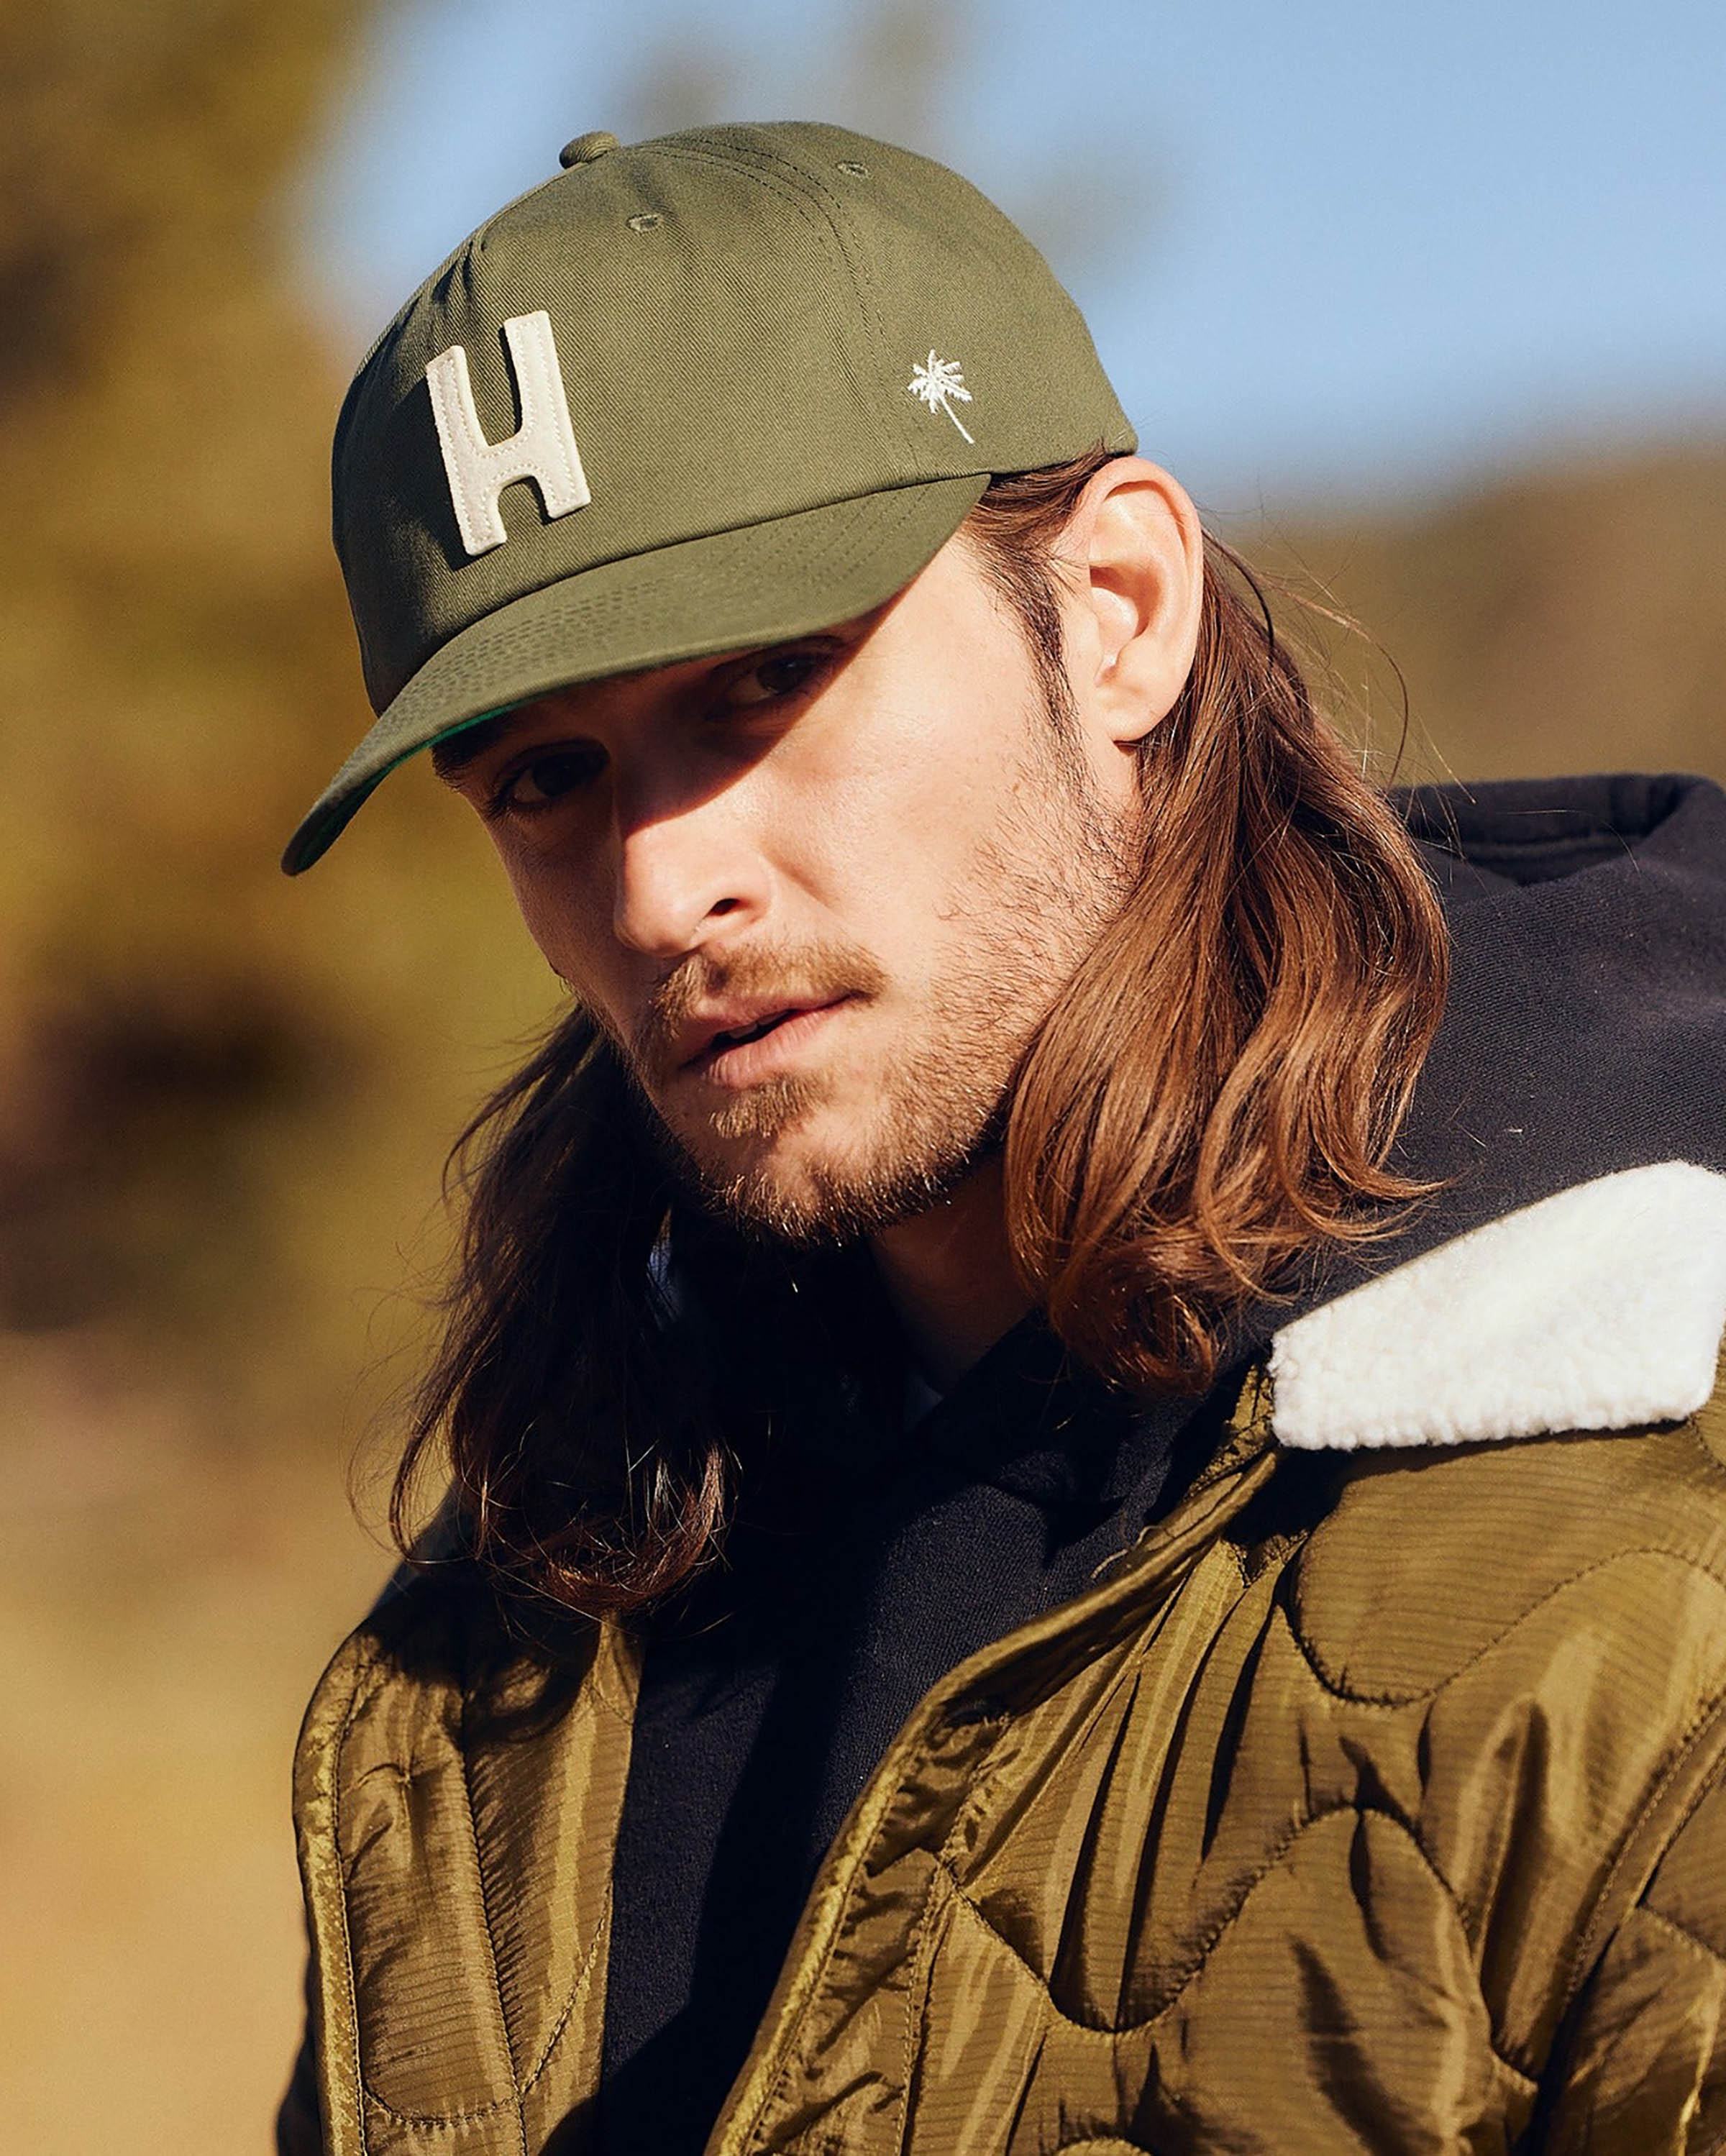 Thomas 5 Panel Hat in Moss Green - undefined - Hemlock Hat Co. Ball Caps